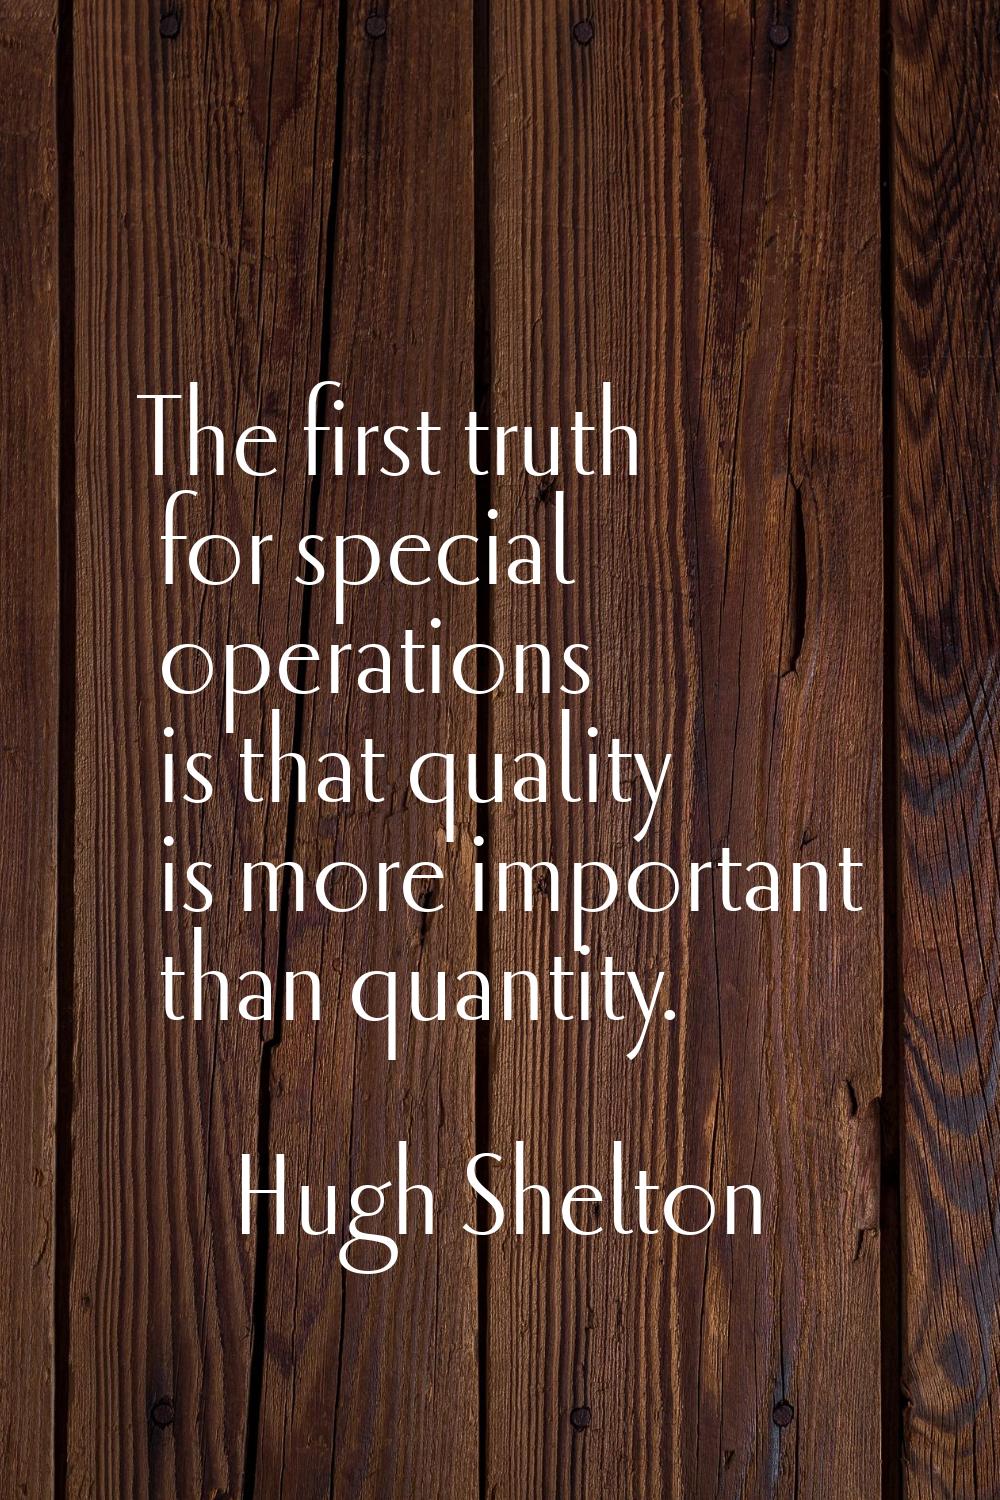 The first truth for special operations is that quality is more important than quantity.